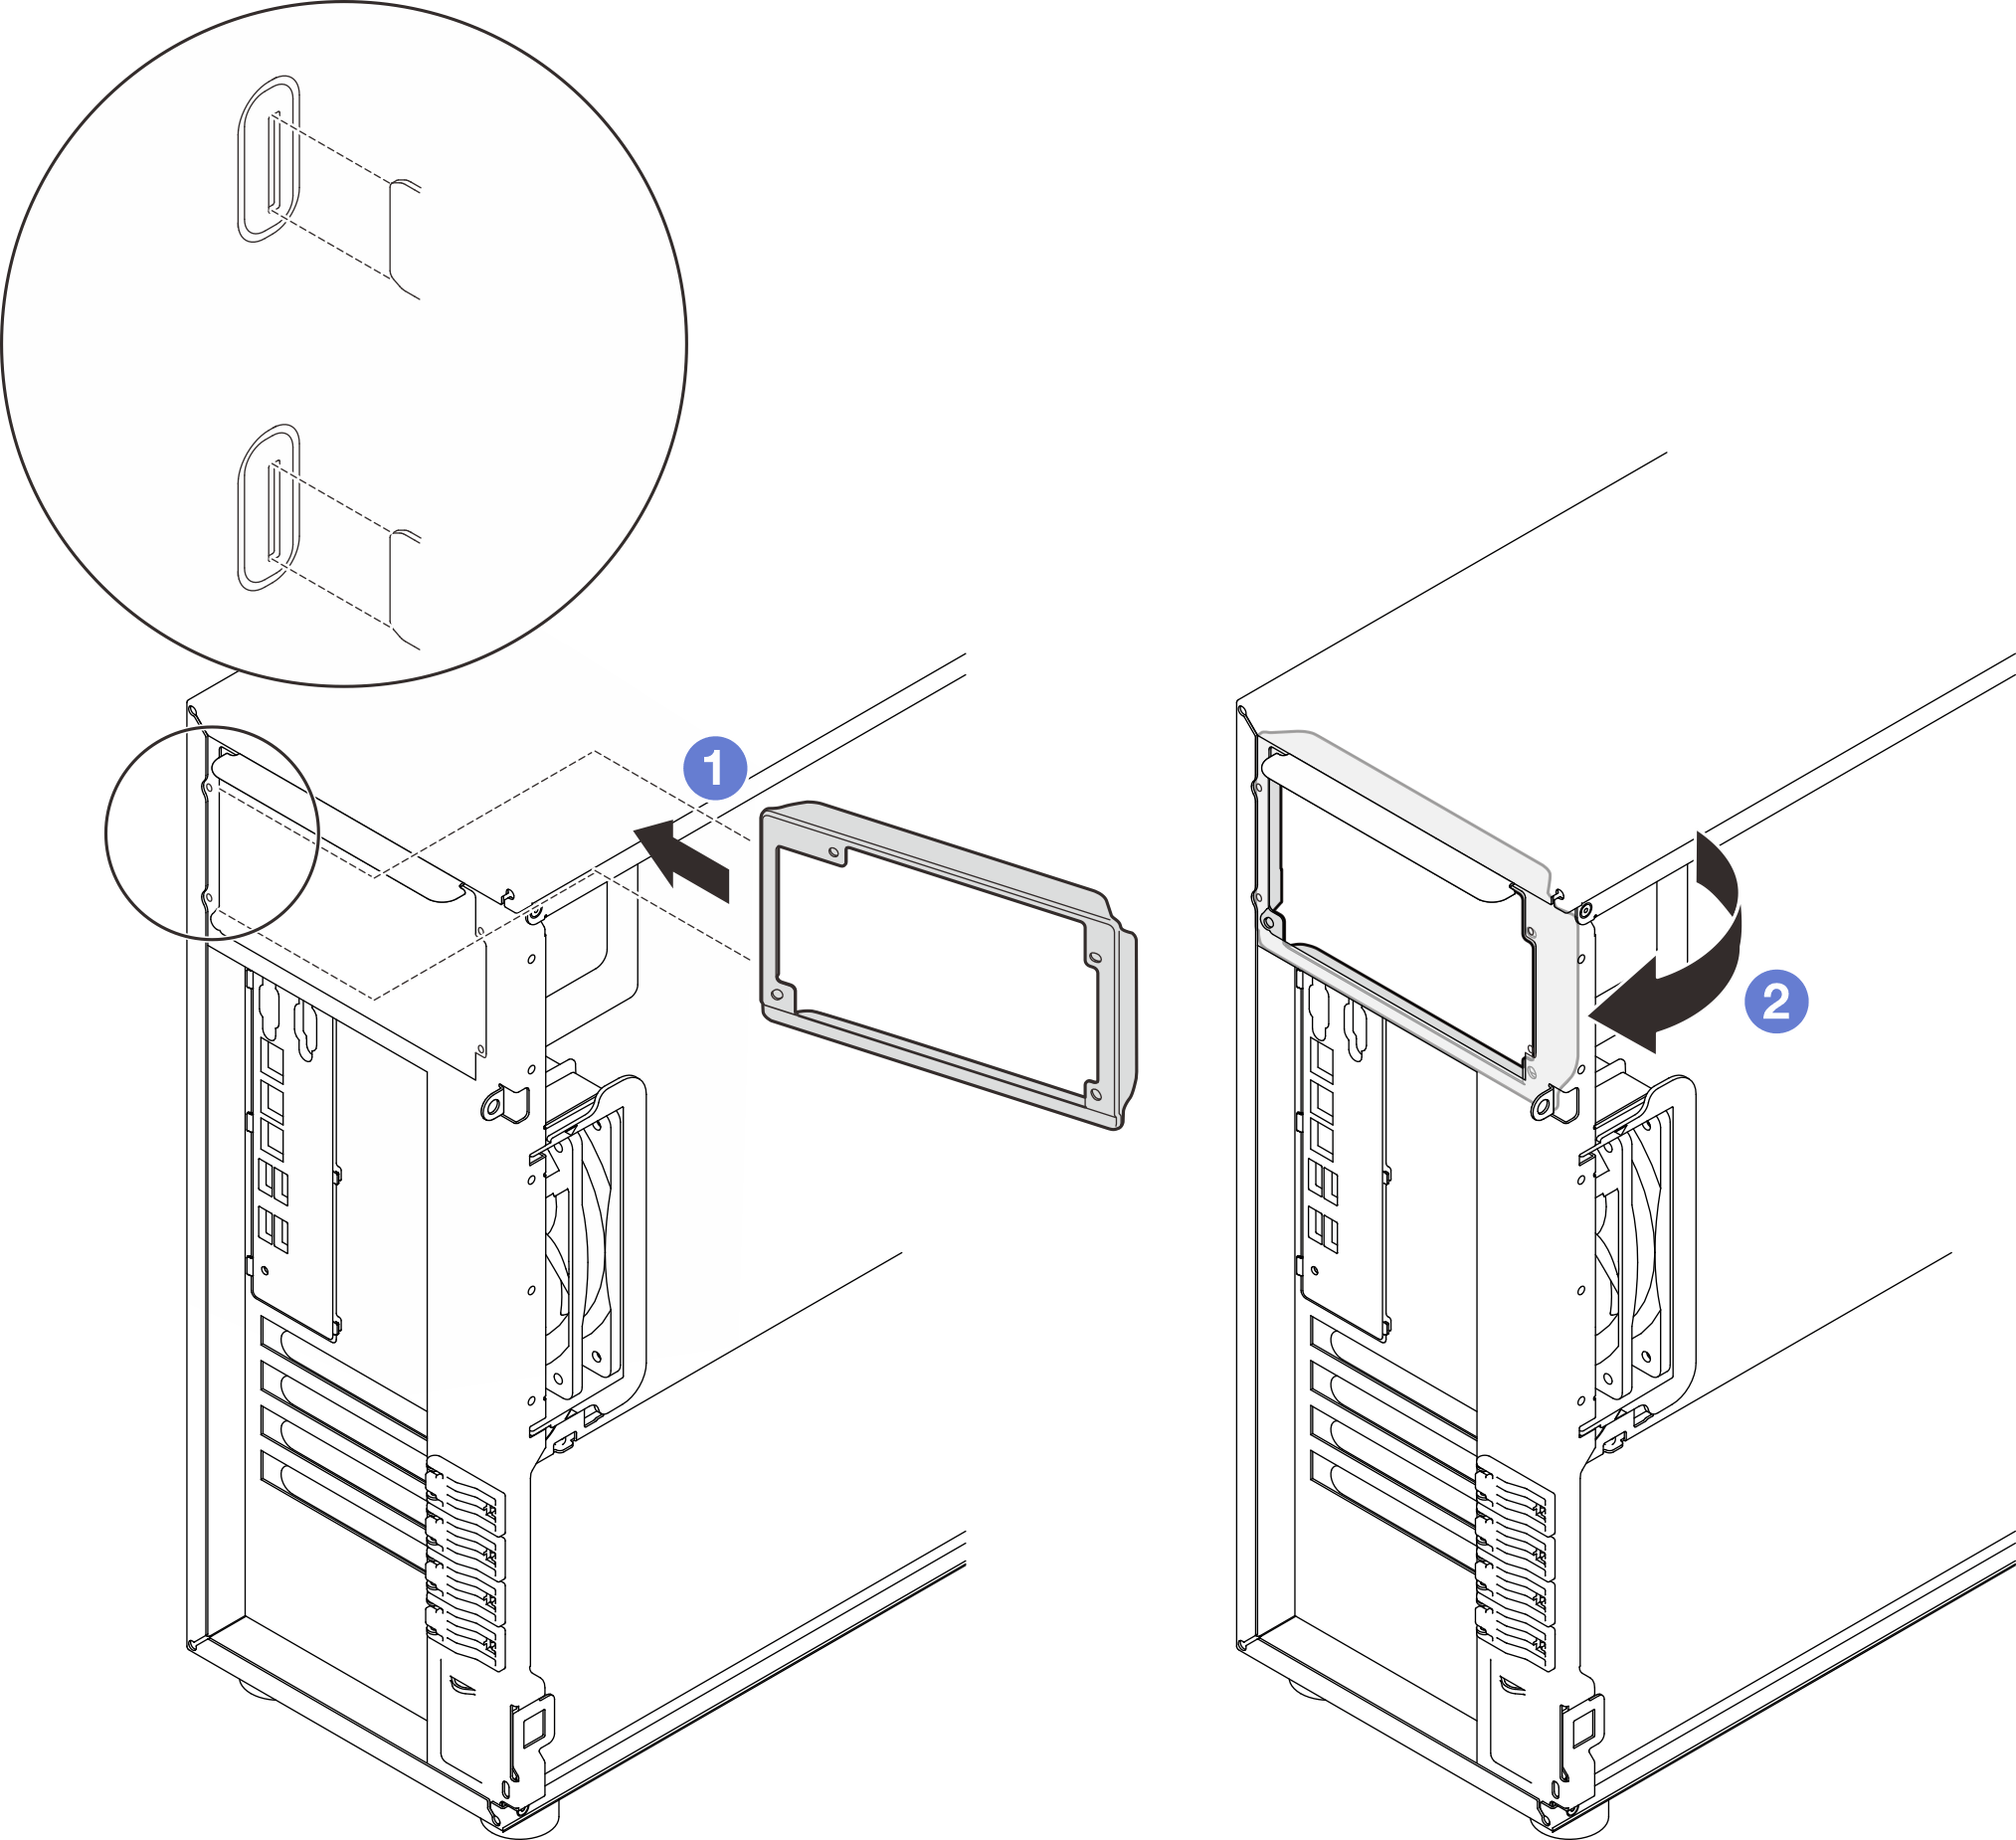 Installing a fixed power supply bracket